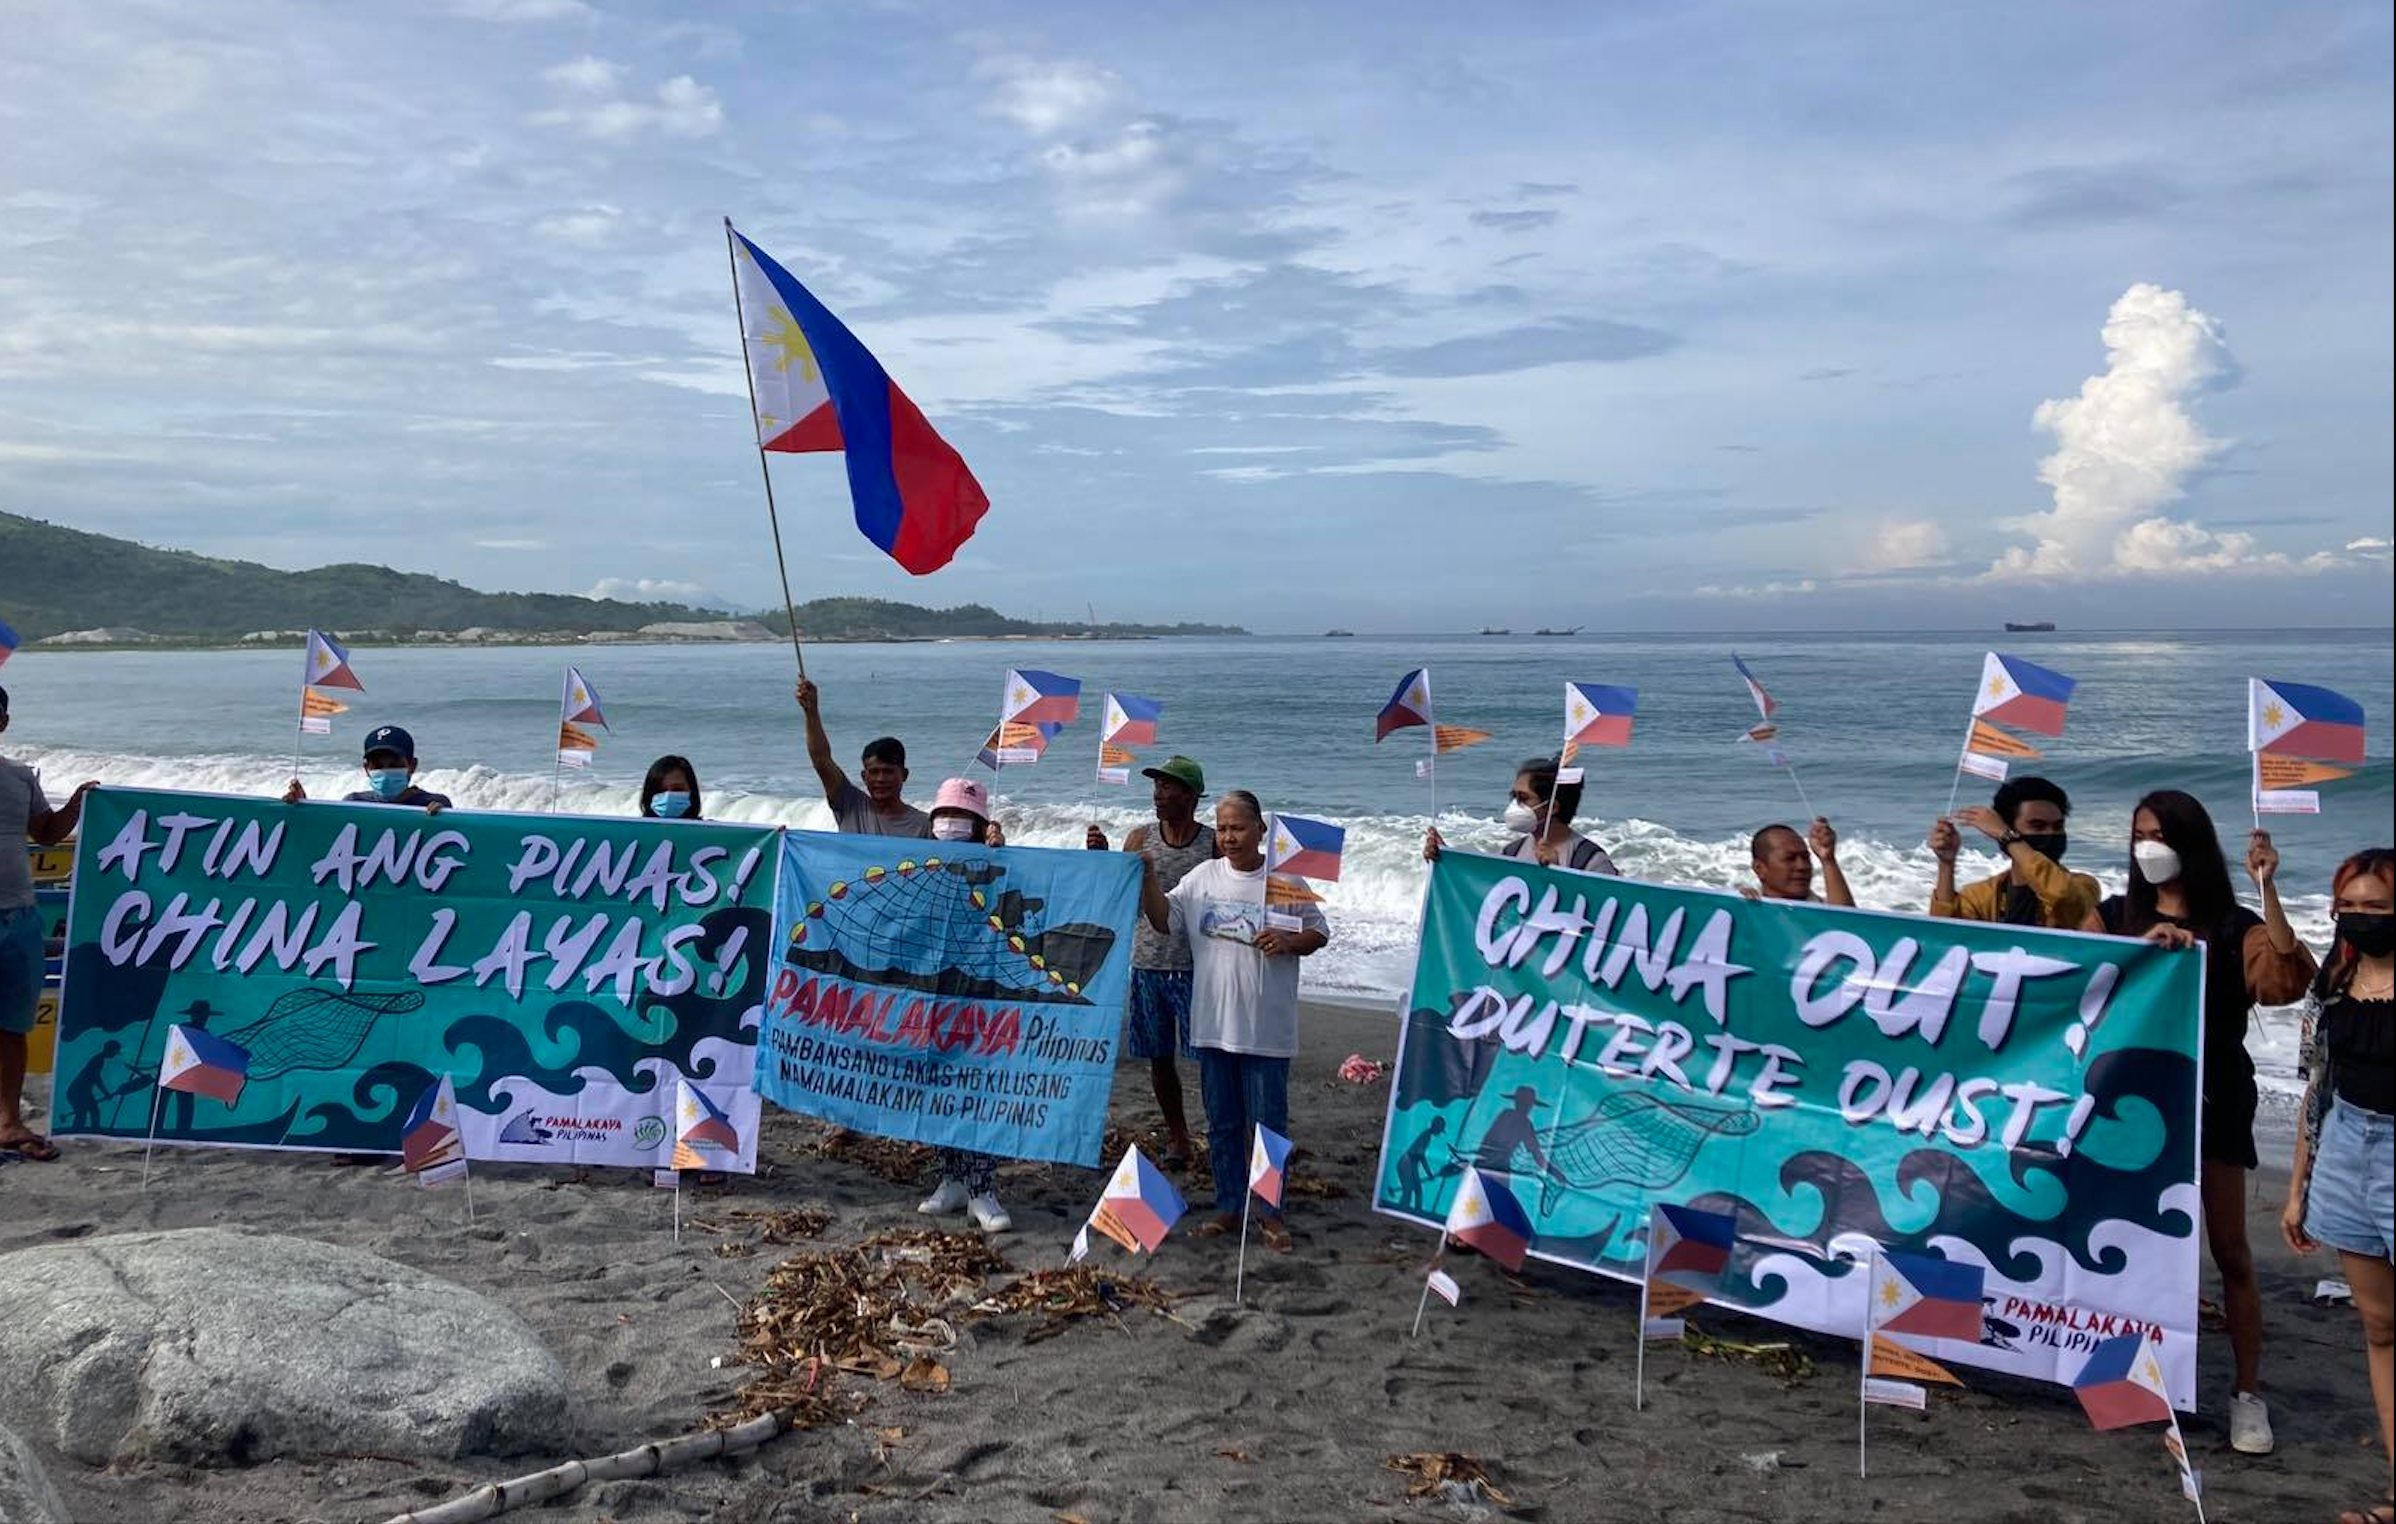 Filipinos have enough of China trampling on sovereignty